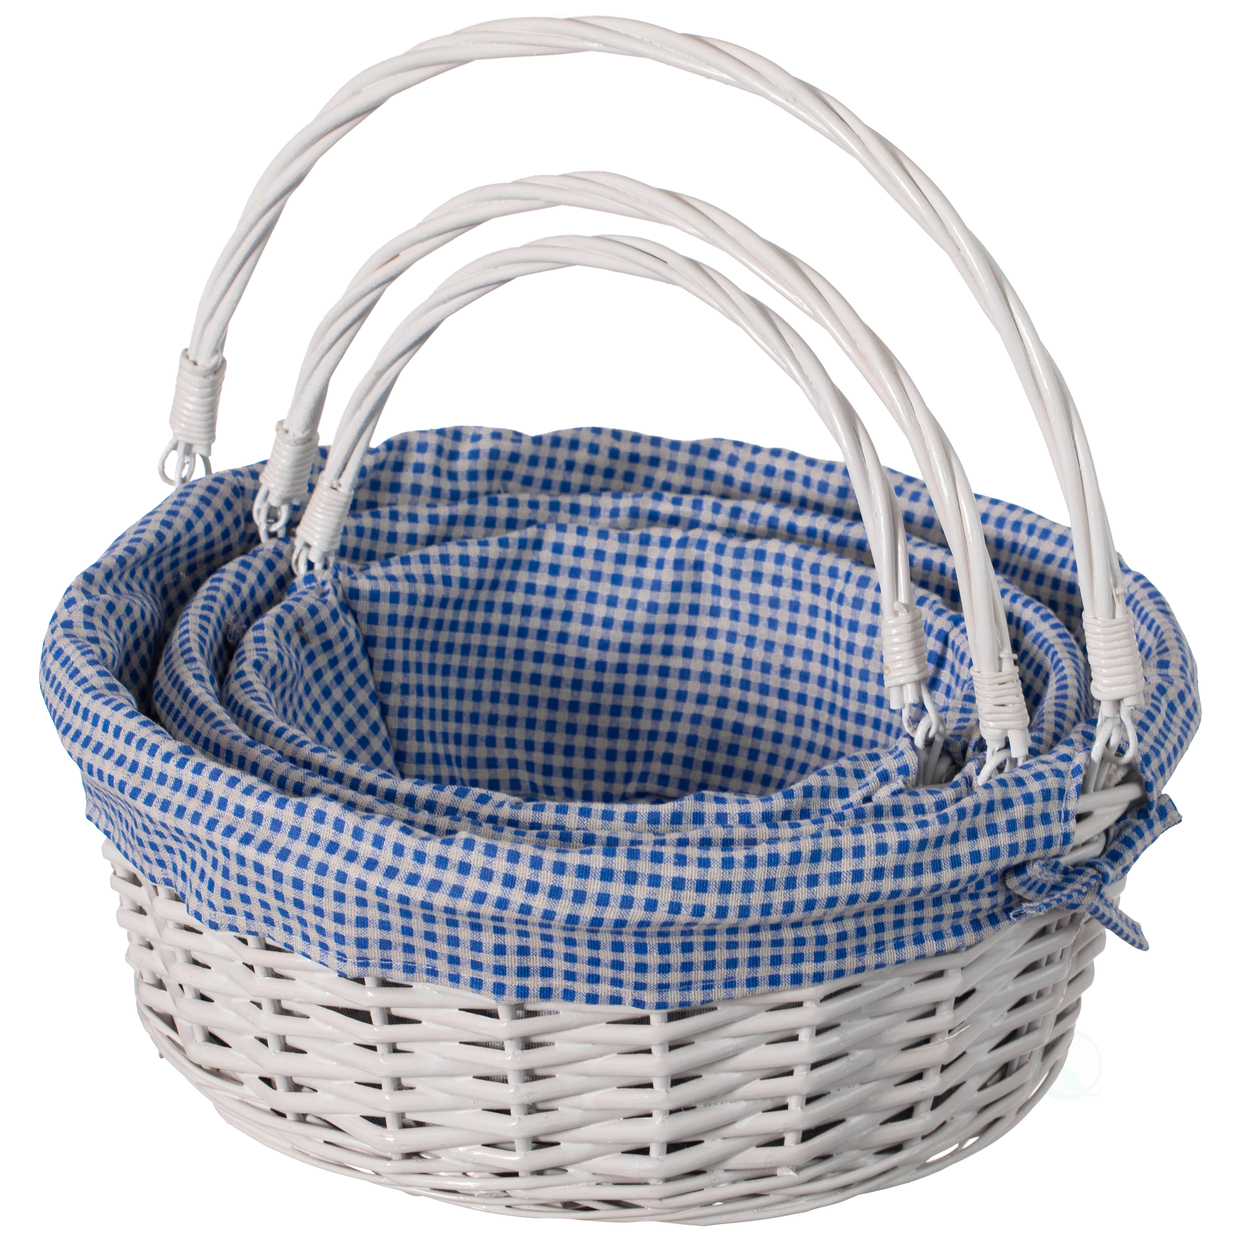 Traditional White Round Willow Gift Basket With Gingham Liner And Sturdy Foldable Handles, Food Snacks Storage Basket - Pink, Set Of 3